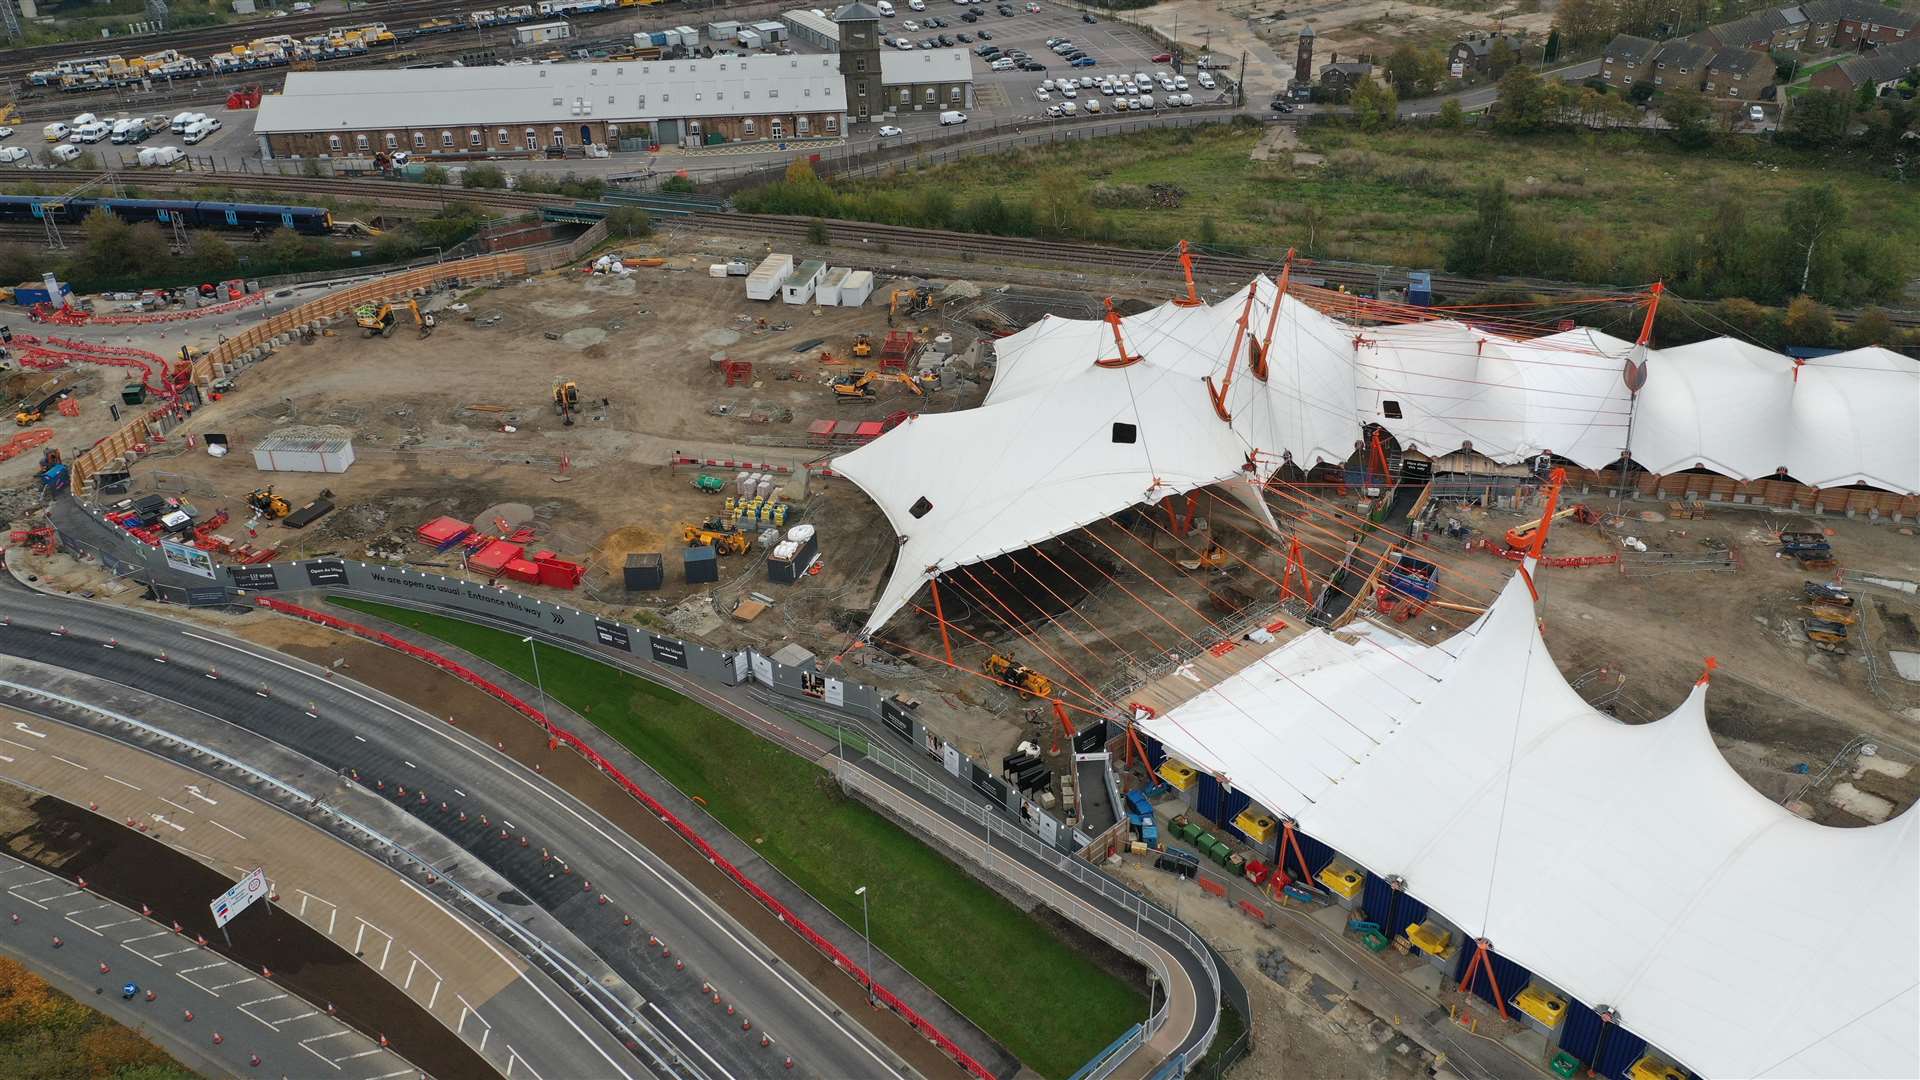 Part of the tented structure above the former food court has gone. Picture: Vantage Photography / info@vantage-photography.co.uk